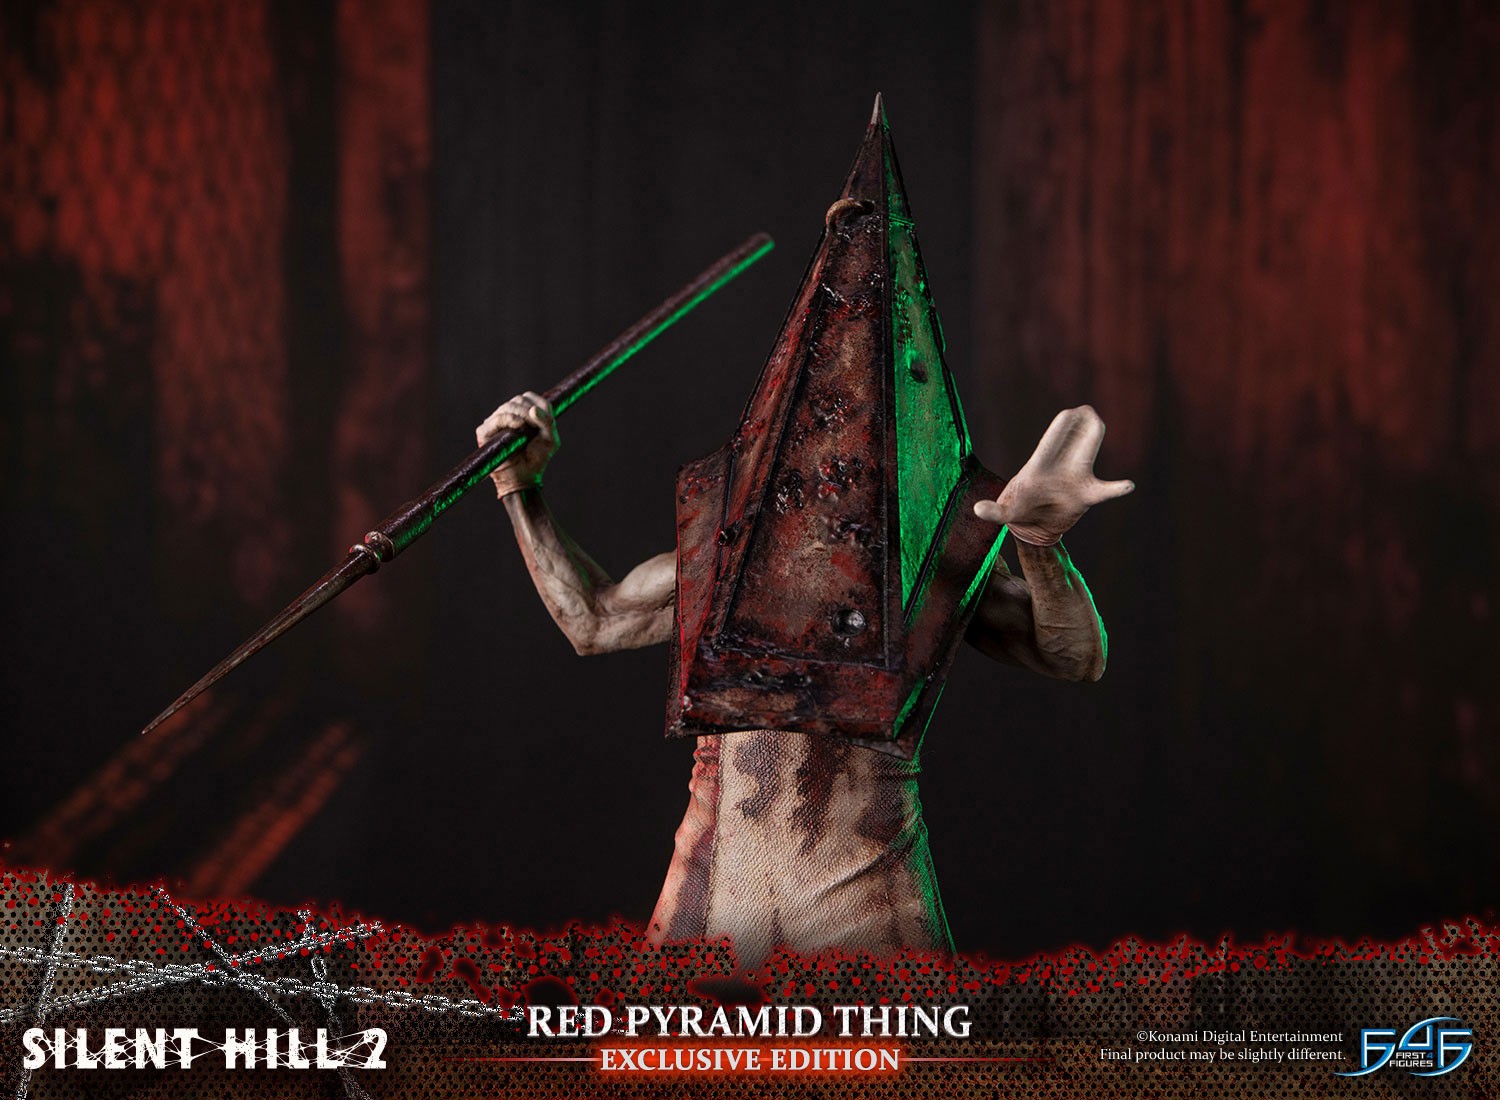 First 4 Figures Silent Hill 2 Pyramid Head Statue - collectorzown